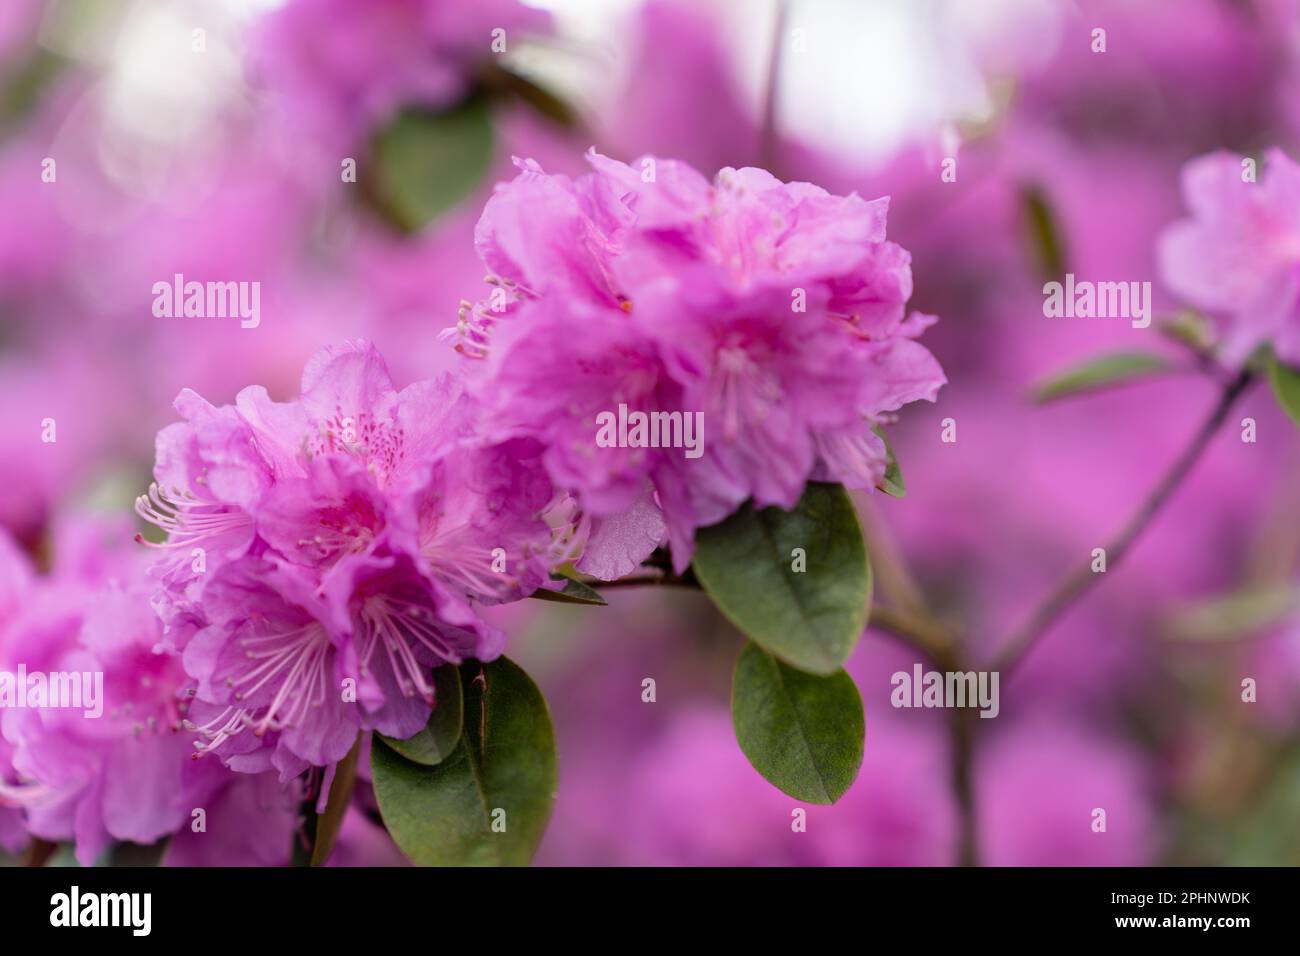 Selective focus on rhododendron 'PJ Mezitt' branch blooming with bright pink flowers Stock Photo